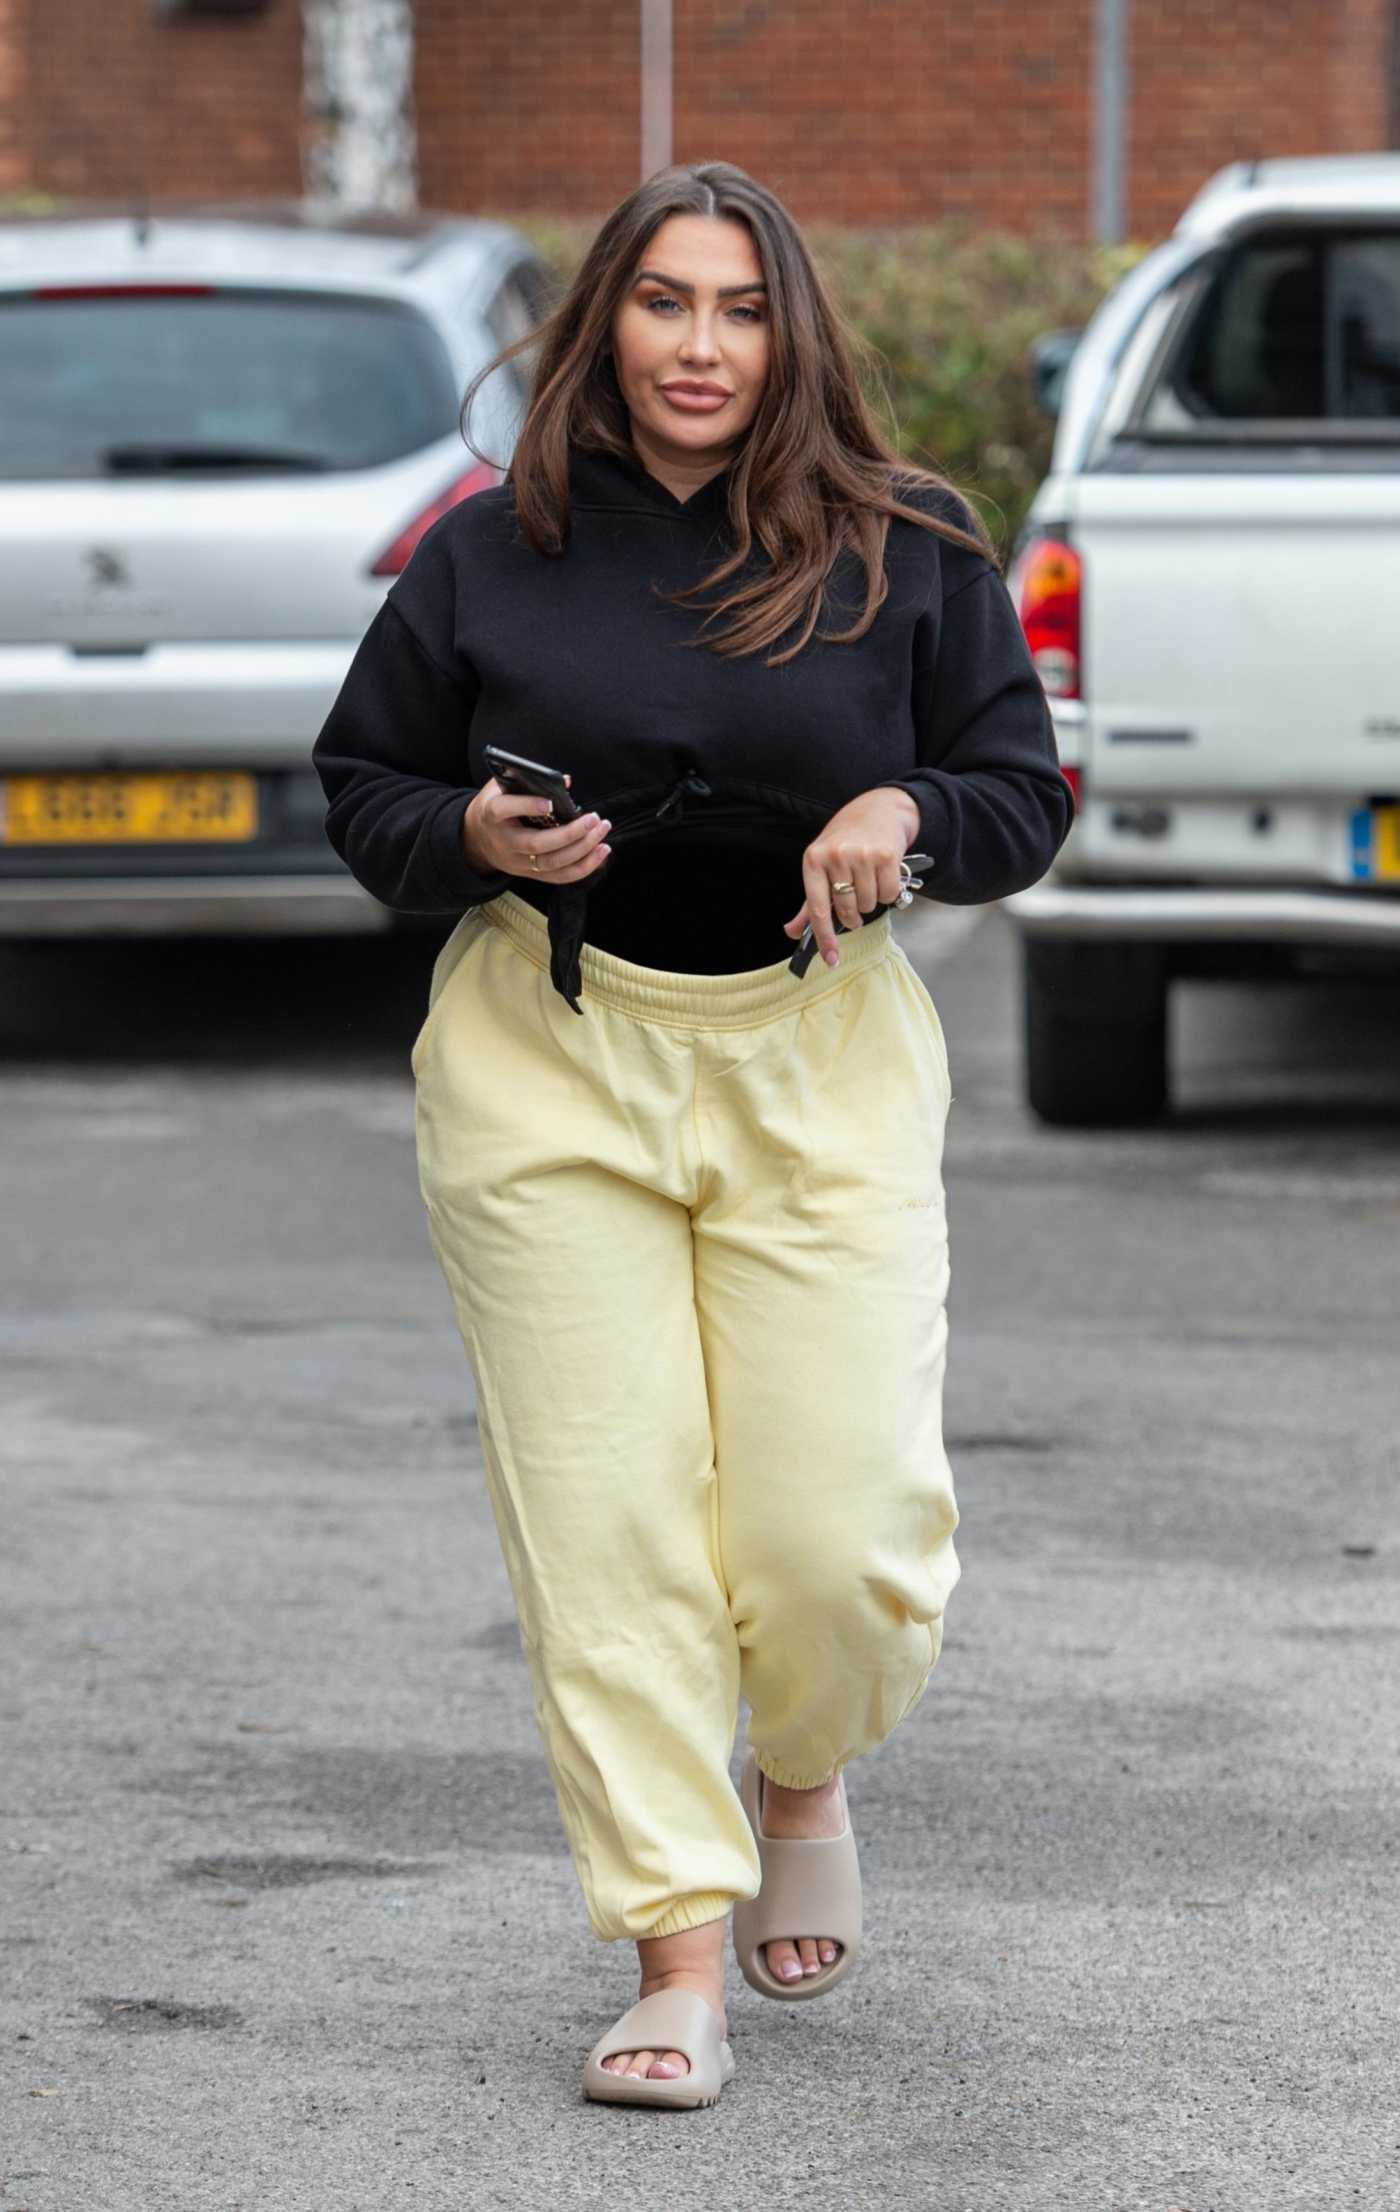 Lauren Goodger in a Yellow Sweatpants Was Seen Out in Essex 01/26/2022